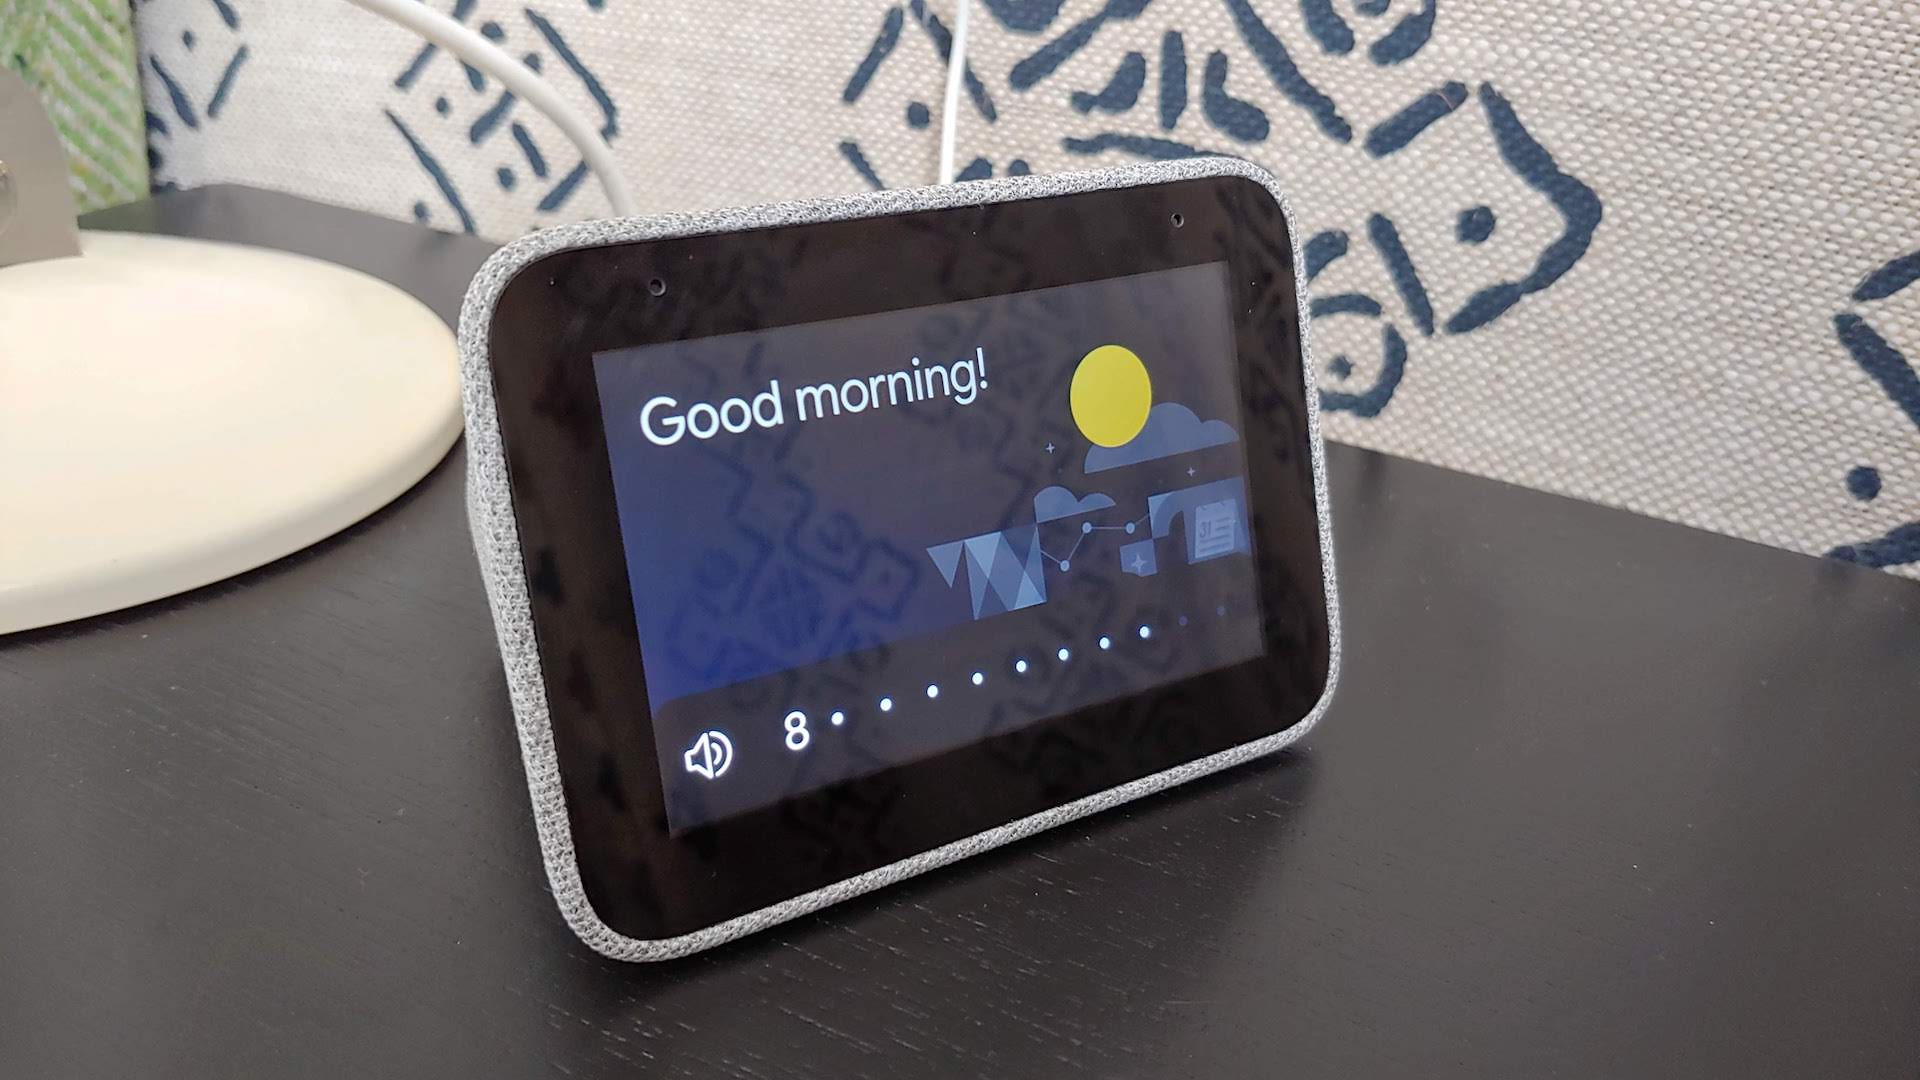 The Lenovo Smart Clock 2 provides Google Assistant another look